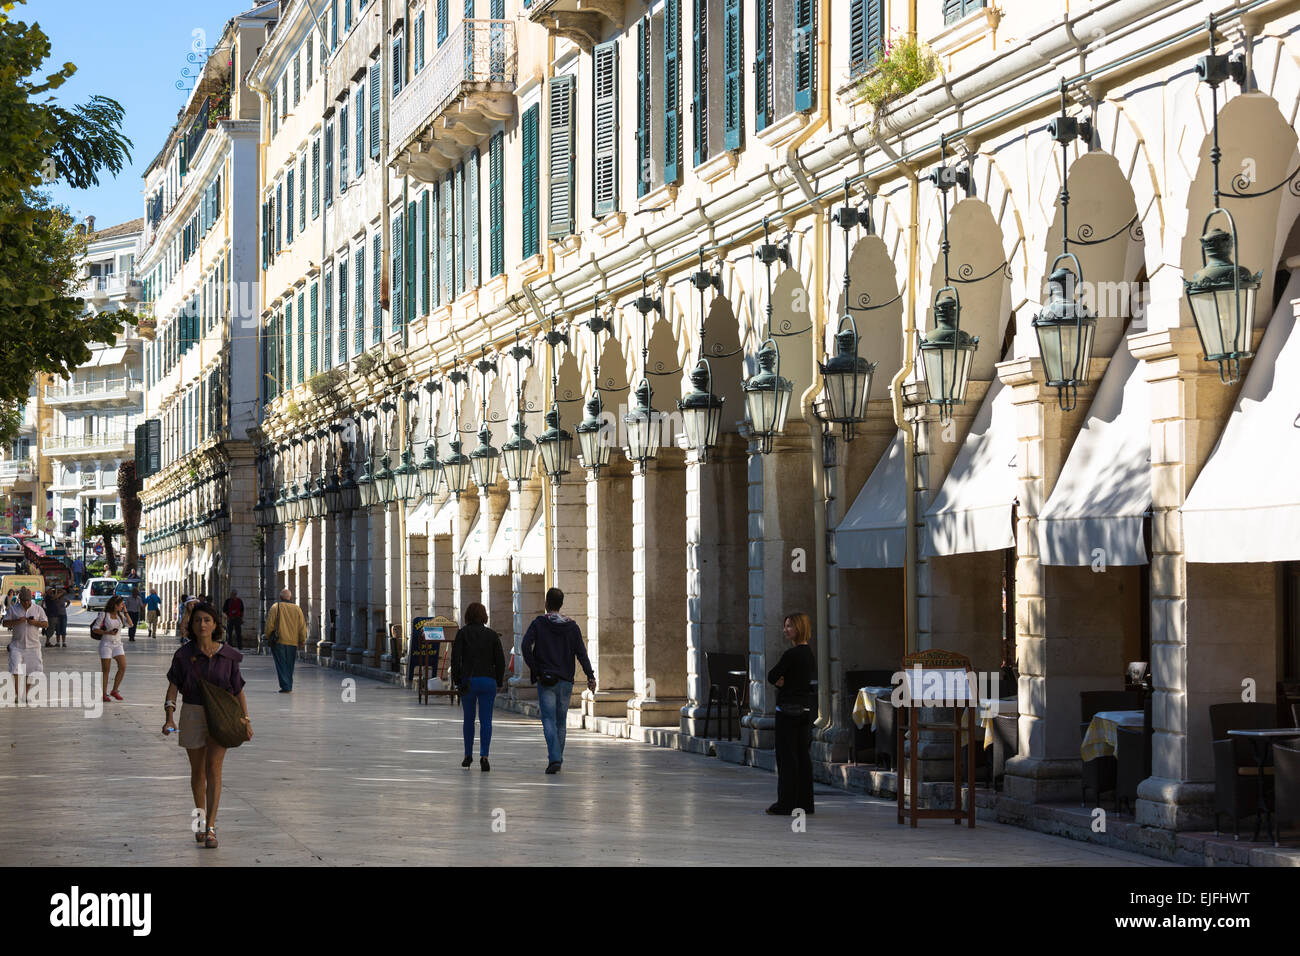 People strolling along the arcades of the Liston at the Spianada in Kerkyra, Corfu Town, Greece Stock Photo